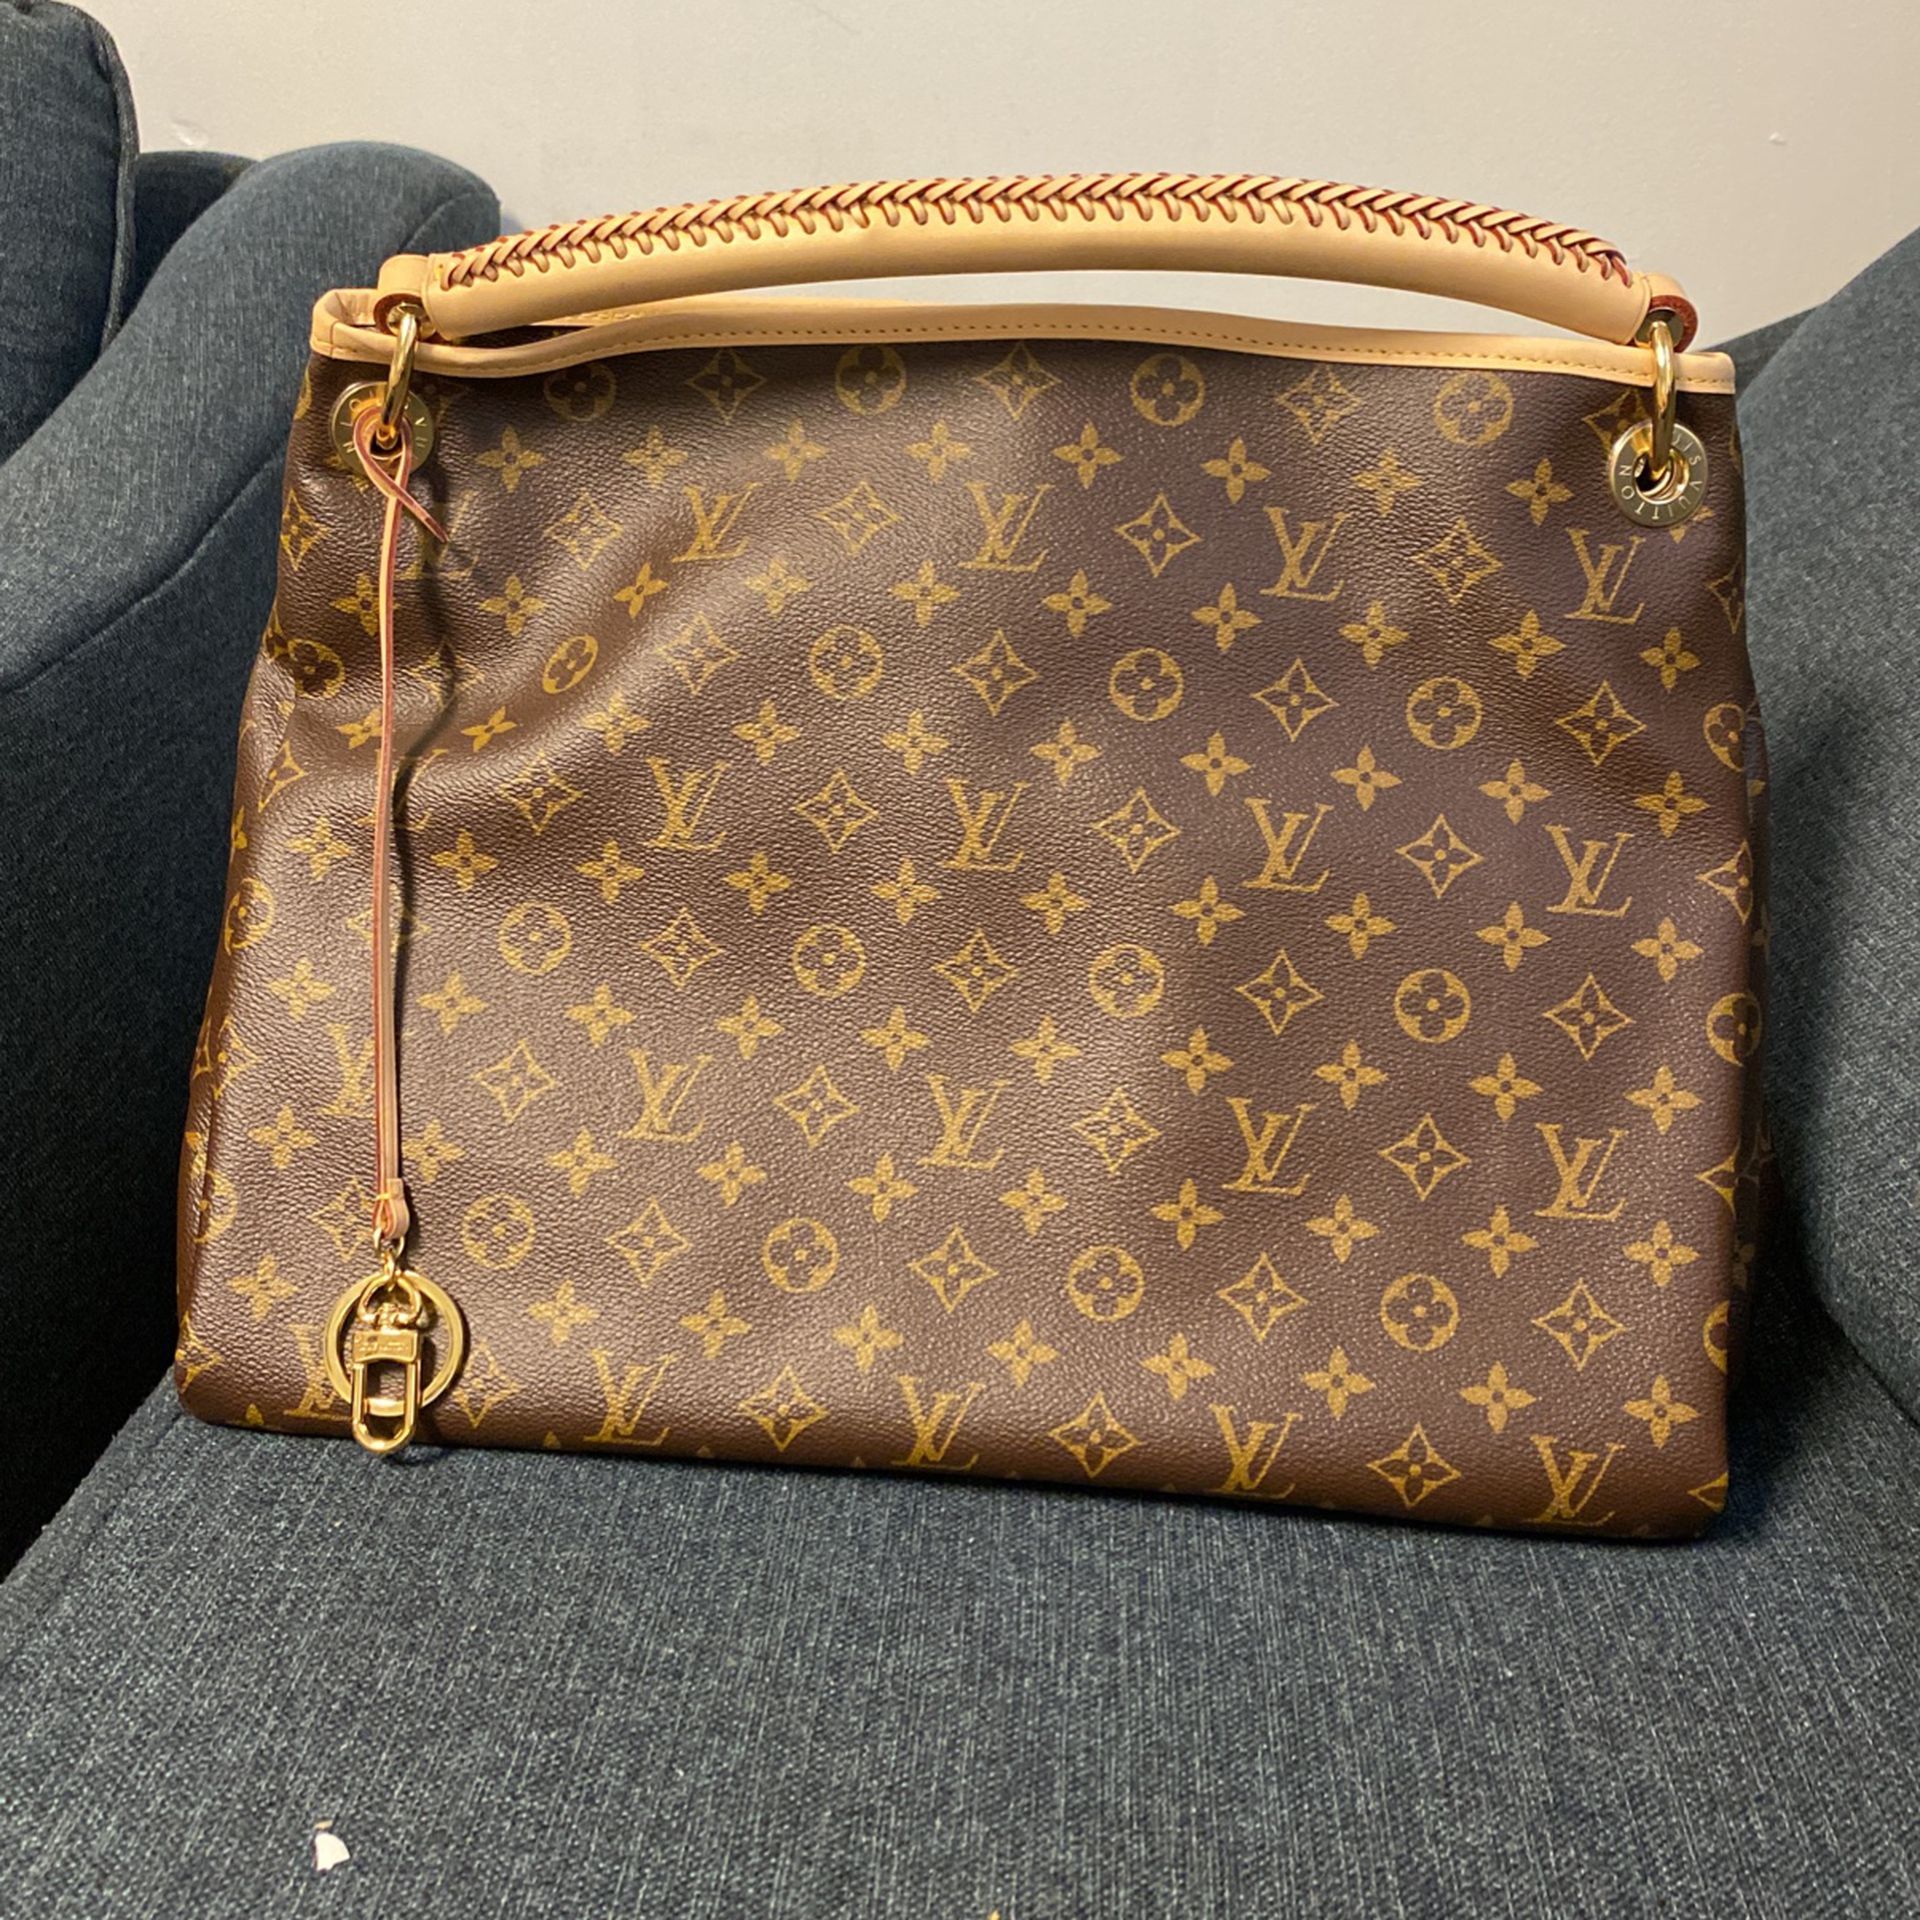 Affordable louis vuitton artsy For Sale, Bags & Wallets